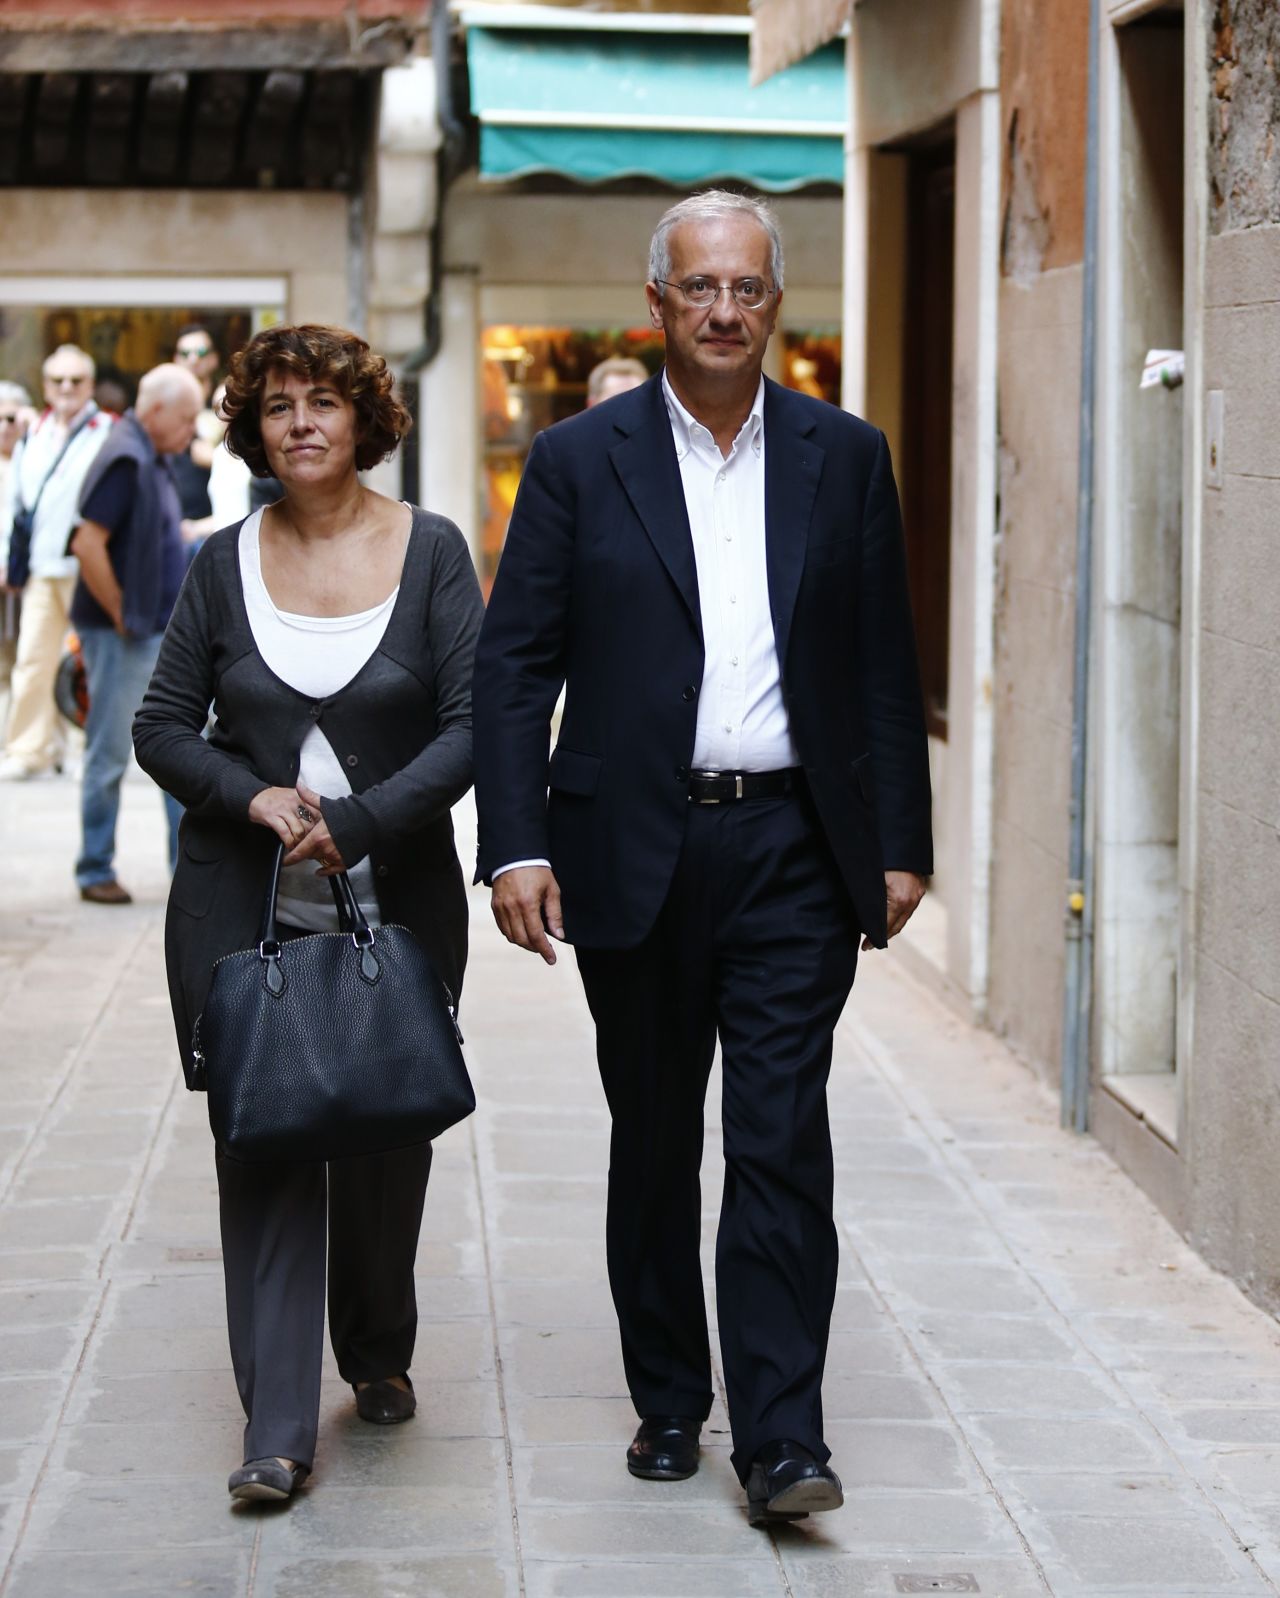 The former mayor of Rome, Walter Veltroni, and his wife, Flavia Prisco, arrive for the wedding.